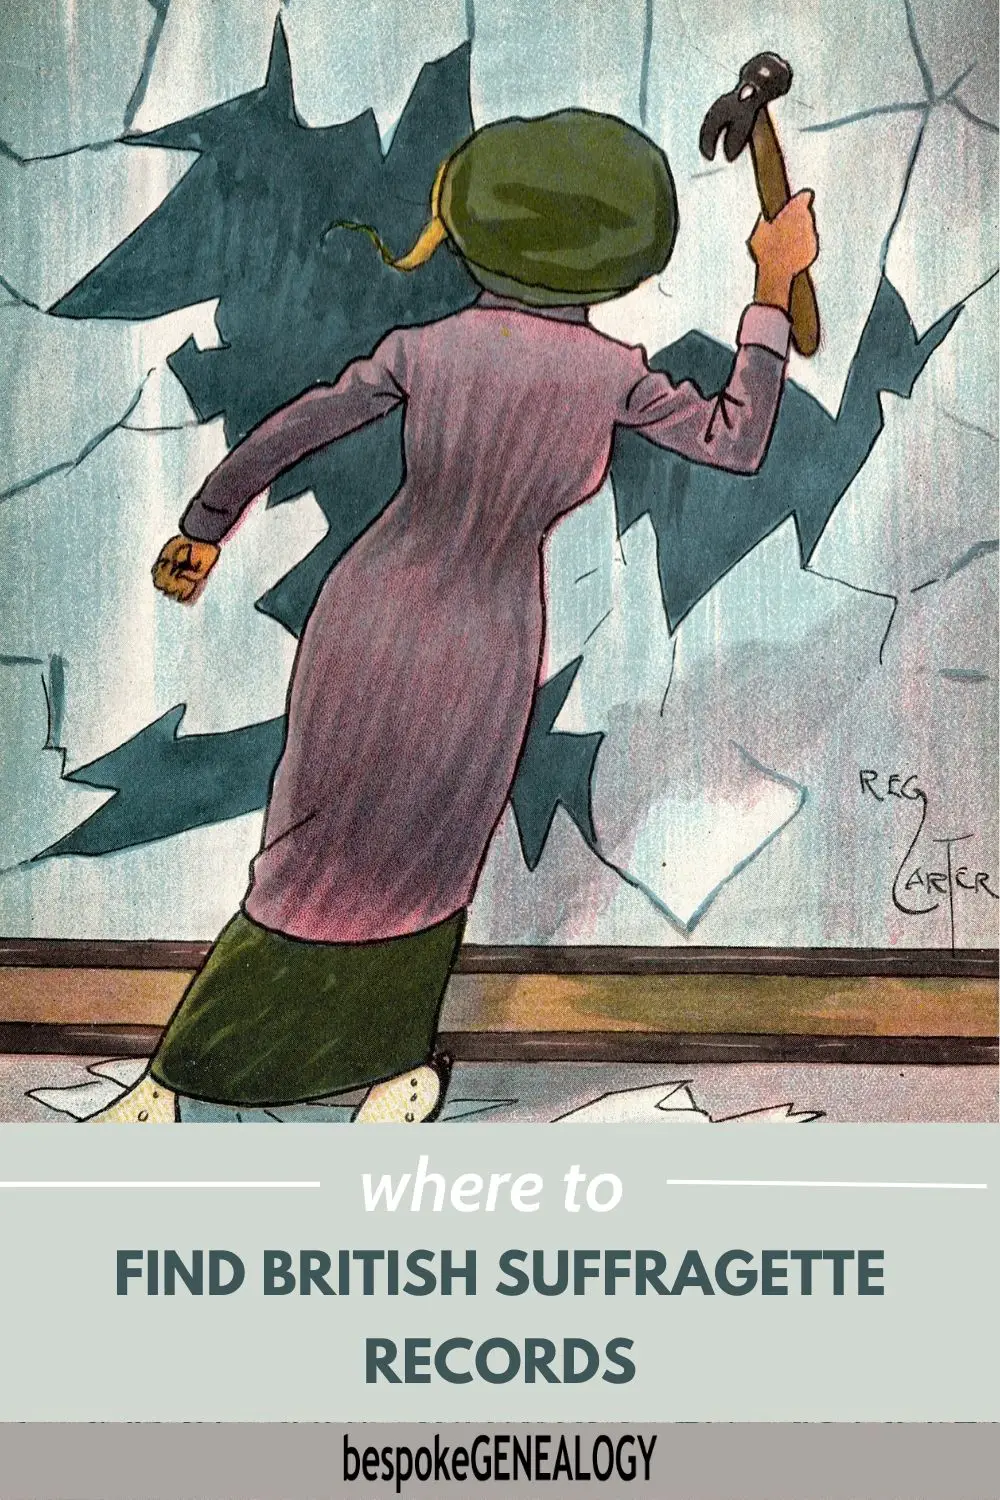 Where to find British suffragette records. Early 20th century cartoon of a suffragette smashing a shop window with a hammer.